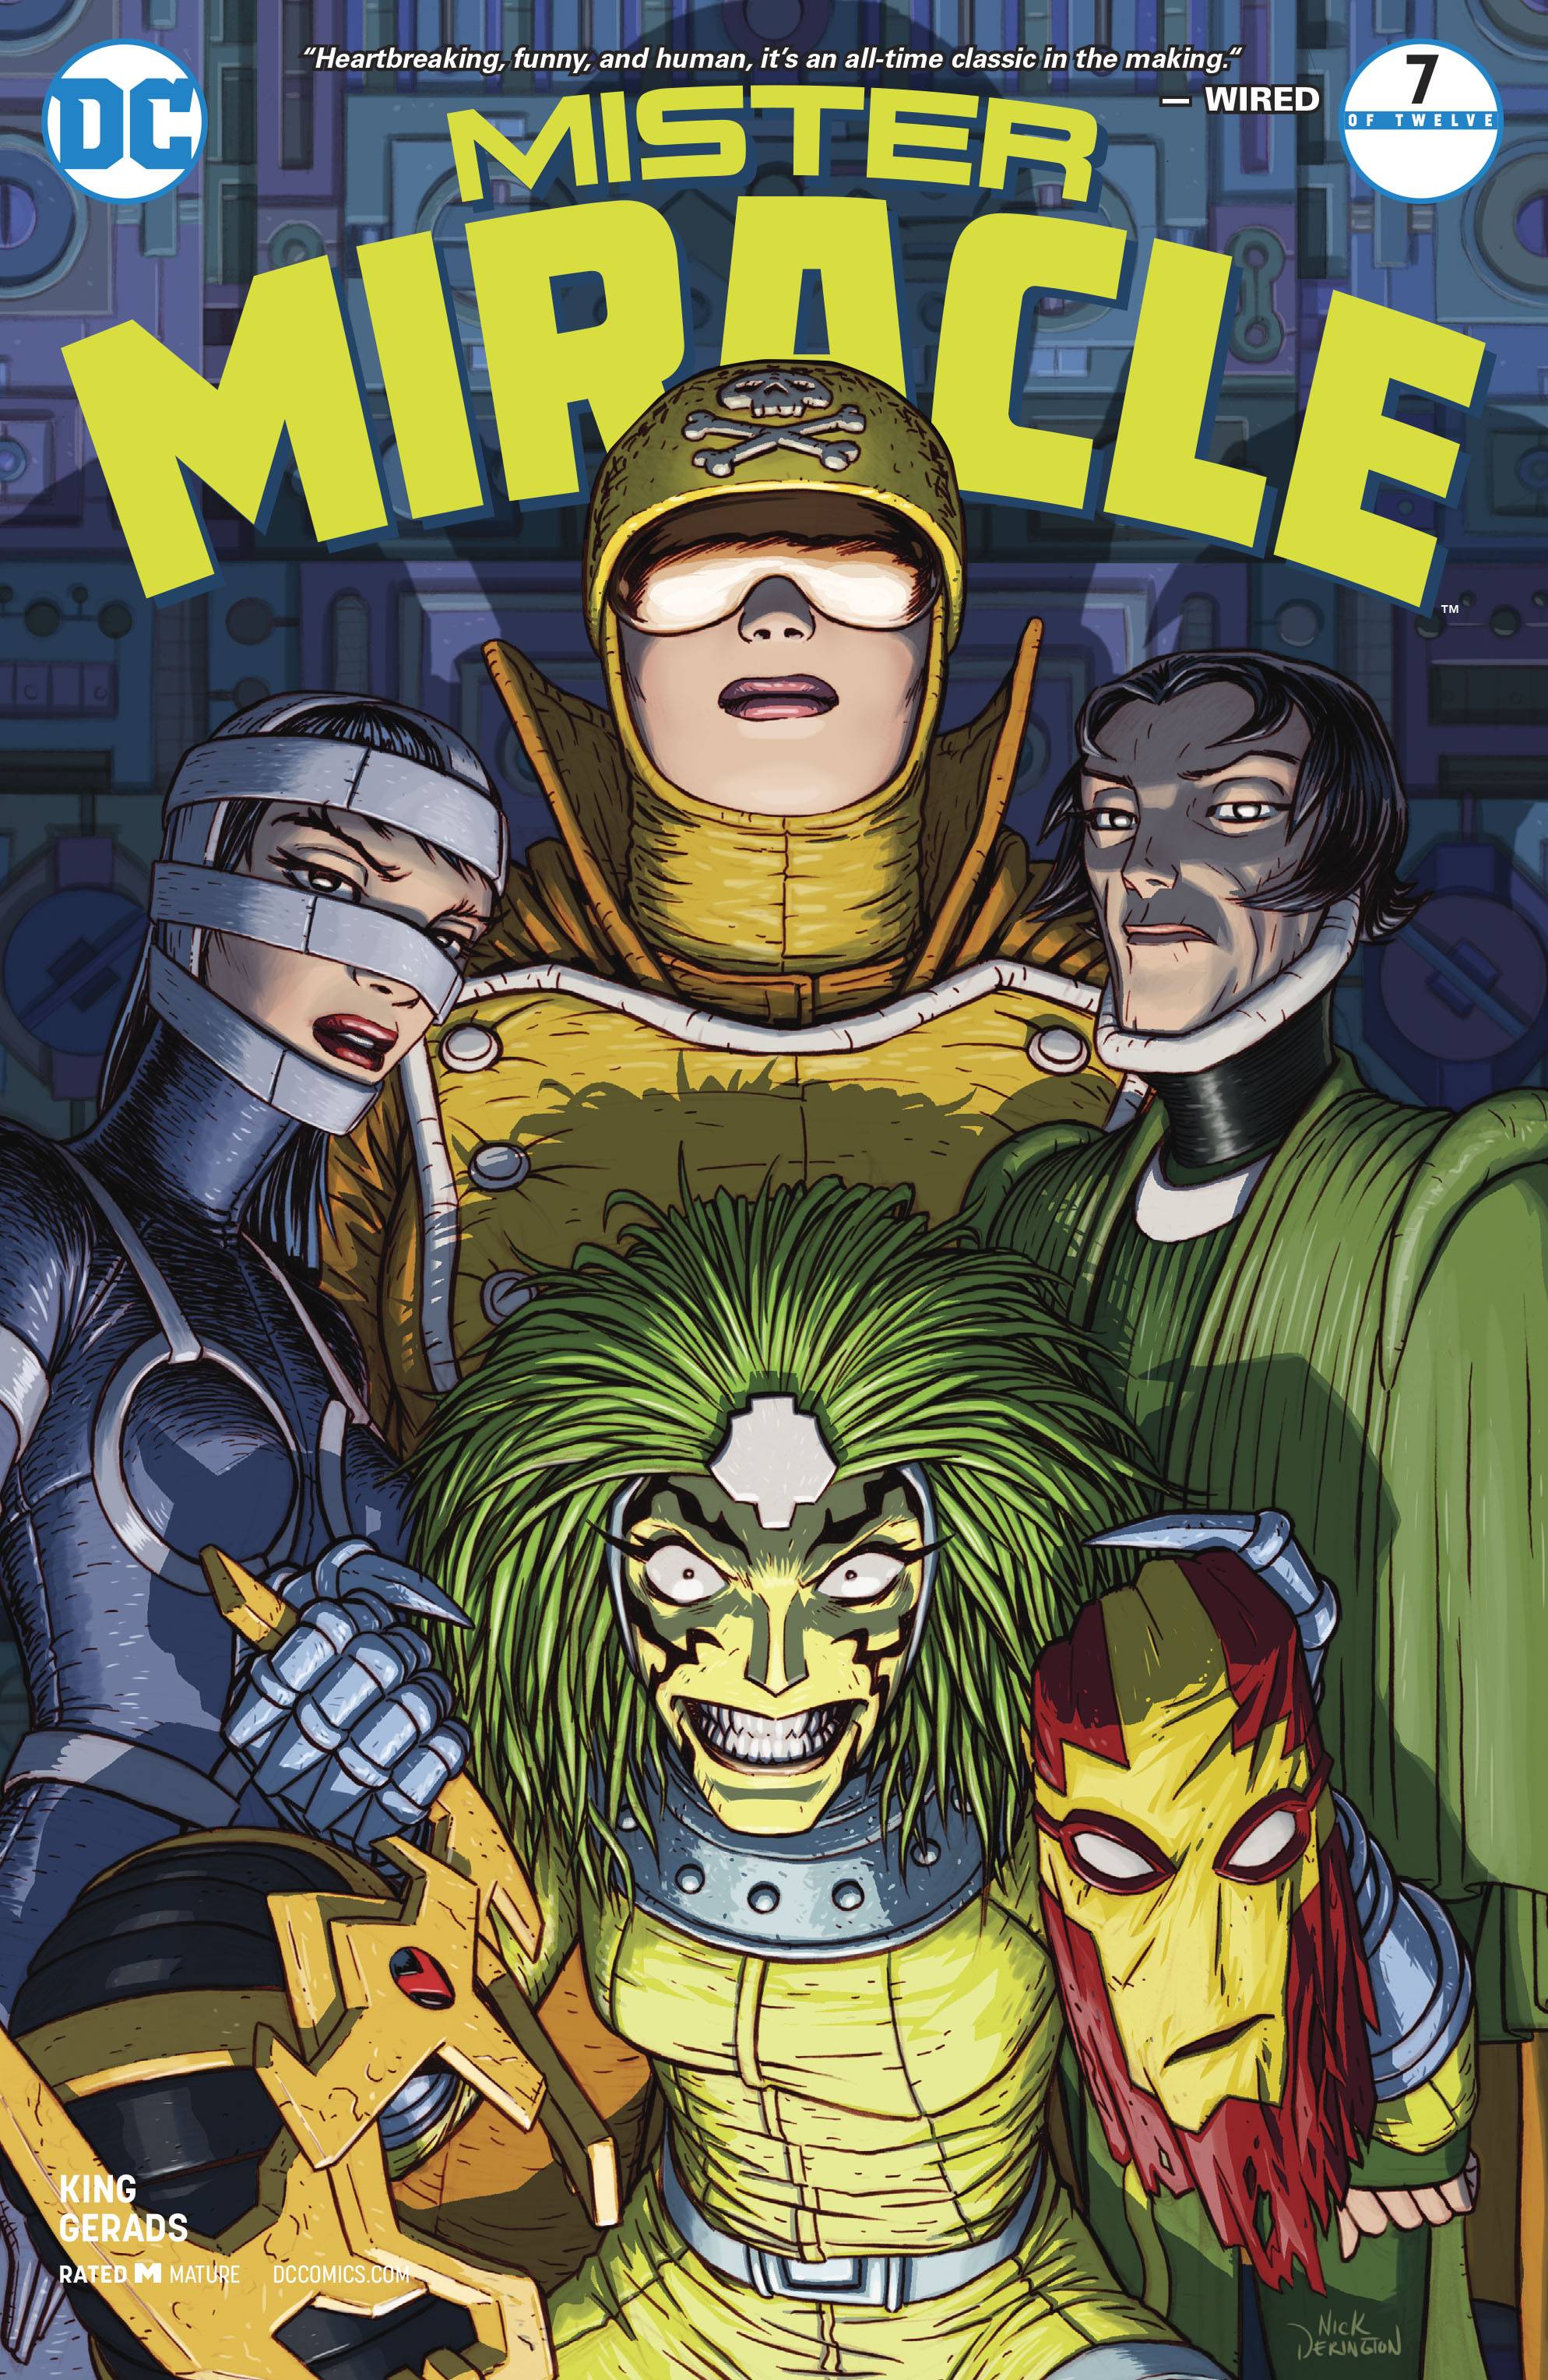 MISTER MIRACLE #7 (OF 12)